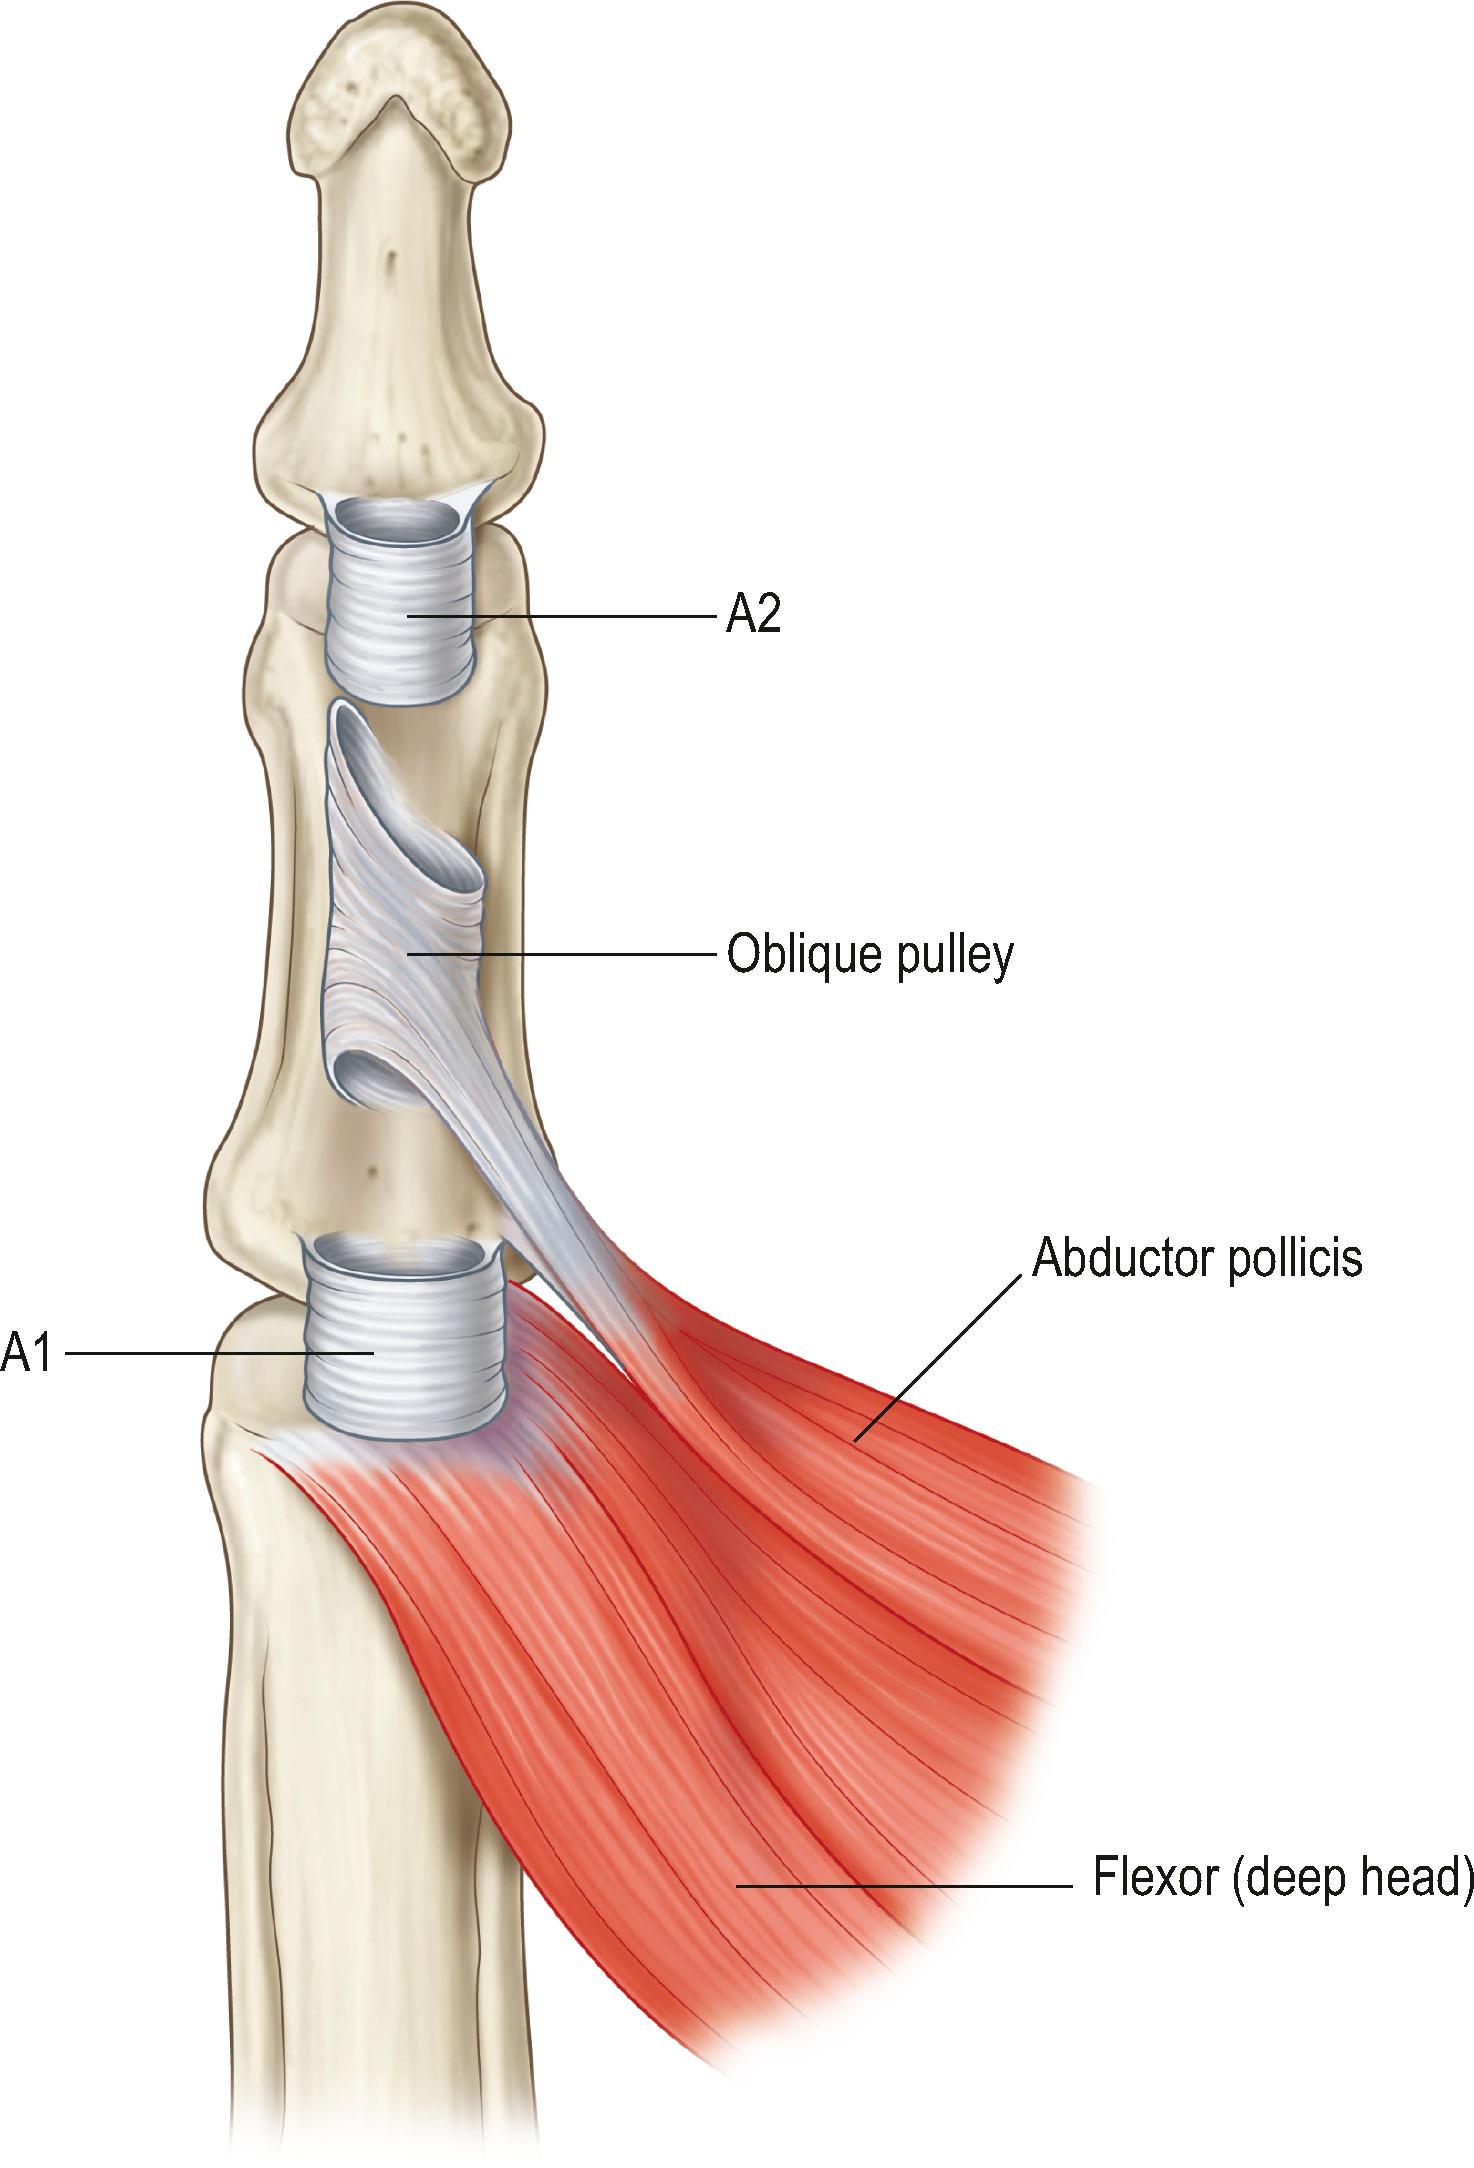 Figure 9.2, Locations of flexor pulleys of the thumb. There are three pulleys in the thumb: A1, oblique, and A2 pulley, from distal to proximal.